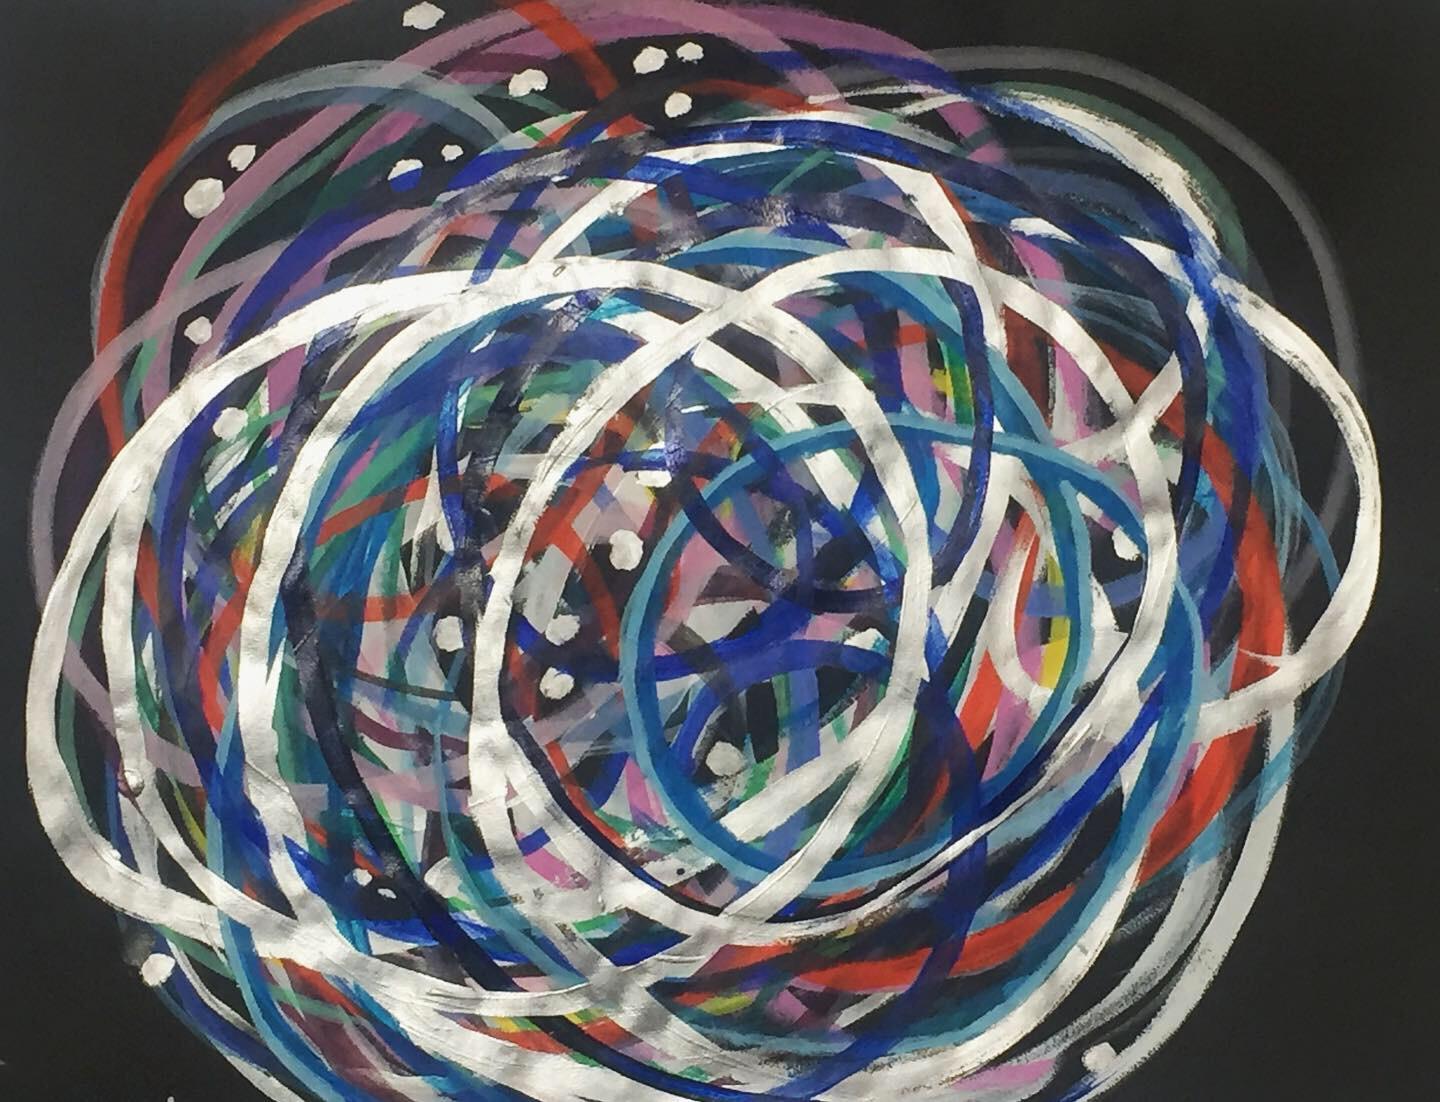 Swirly Ball with Silver on Black Ground - Painting by Nina Bovasso